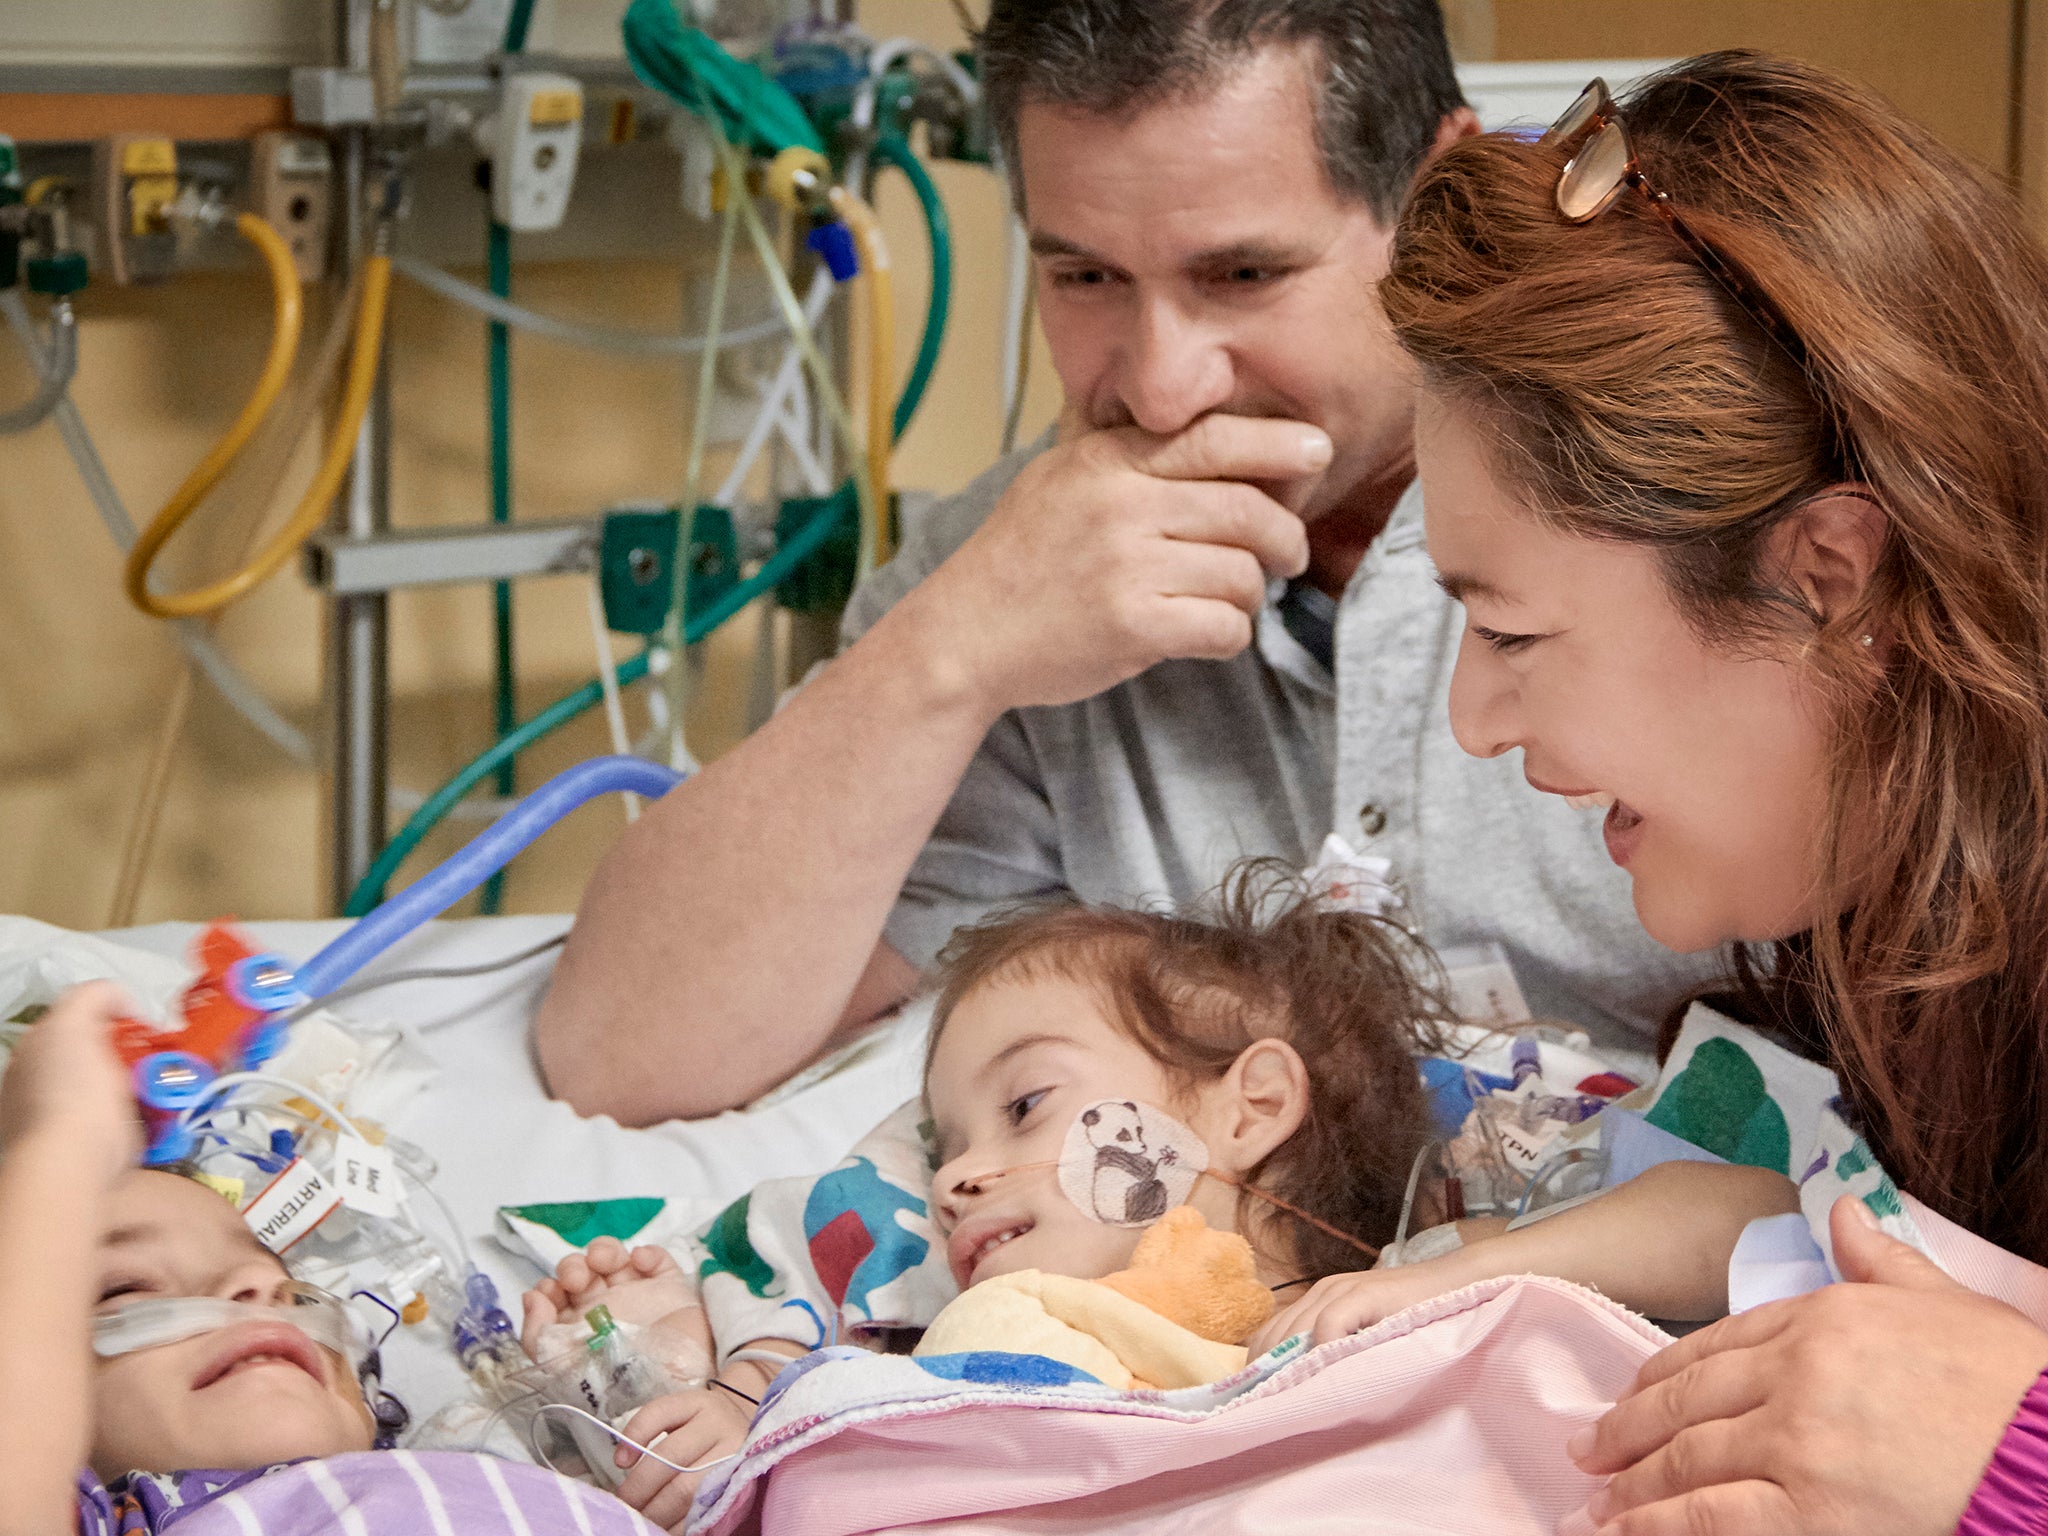 Conjoined Twins Having Sex - Conjoined California twins reunited after 17-hour separation ...